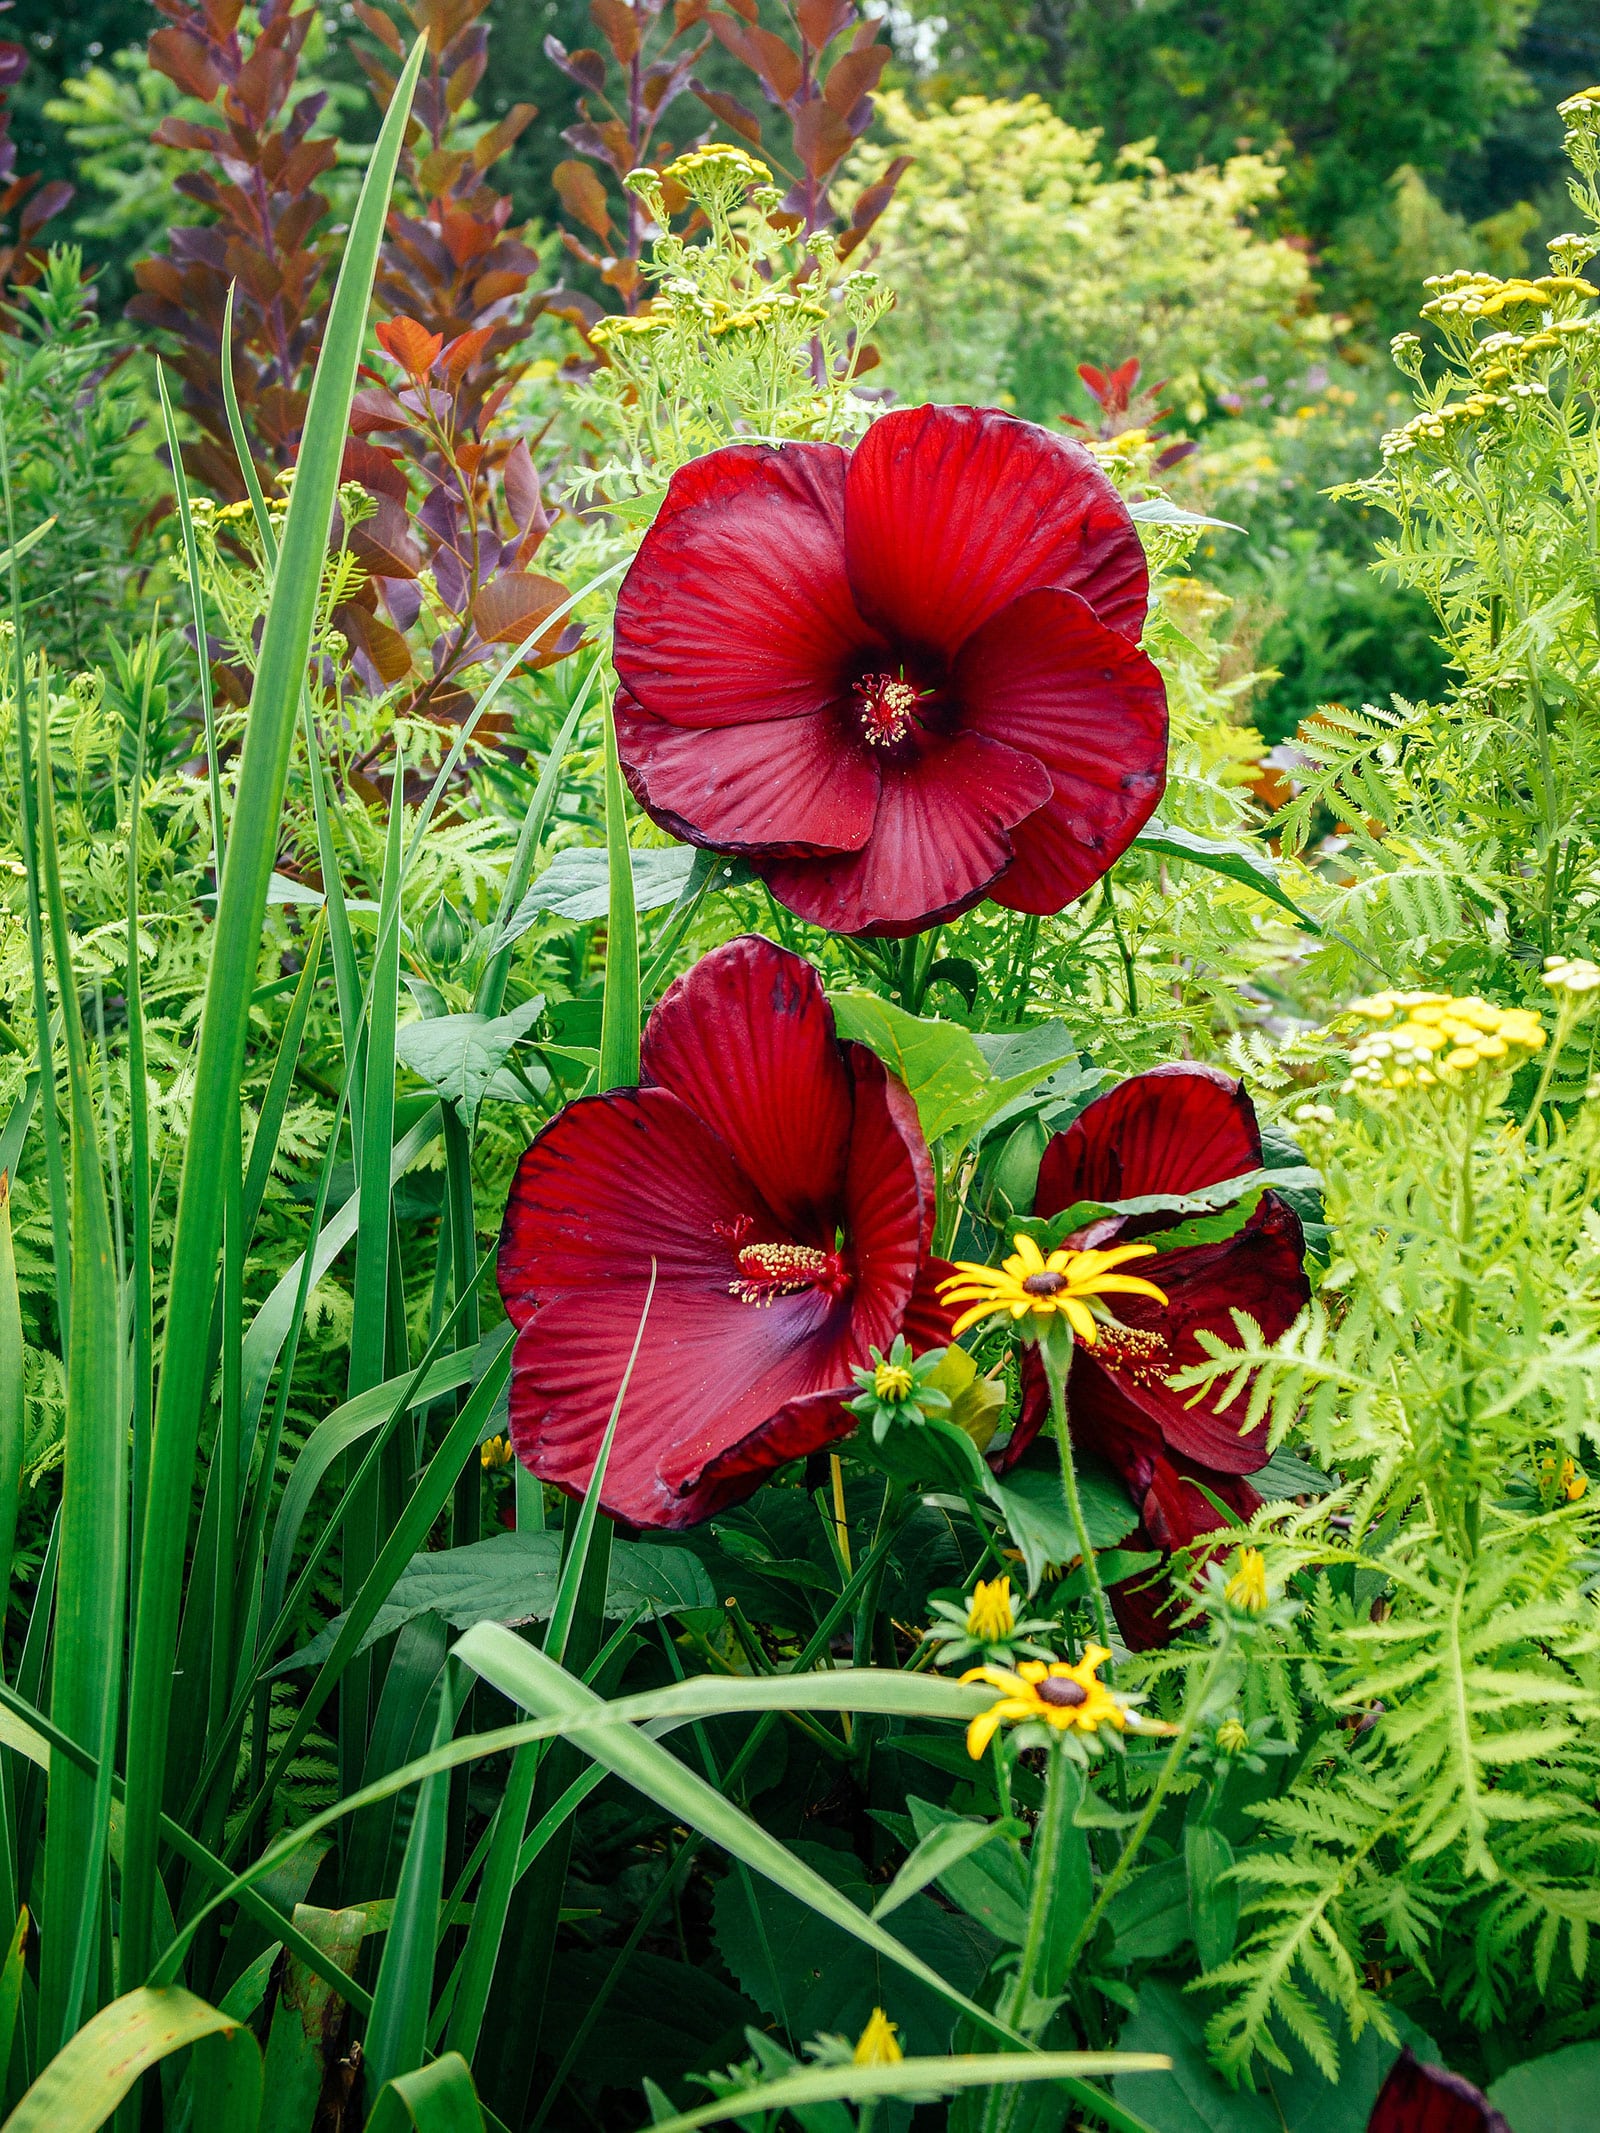 Deep red hardy hibiscus flowers growing in a flower bed with black-eyed Susans, tansy, and irises